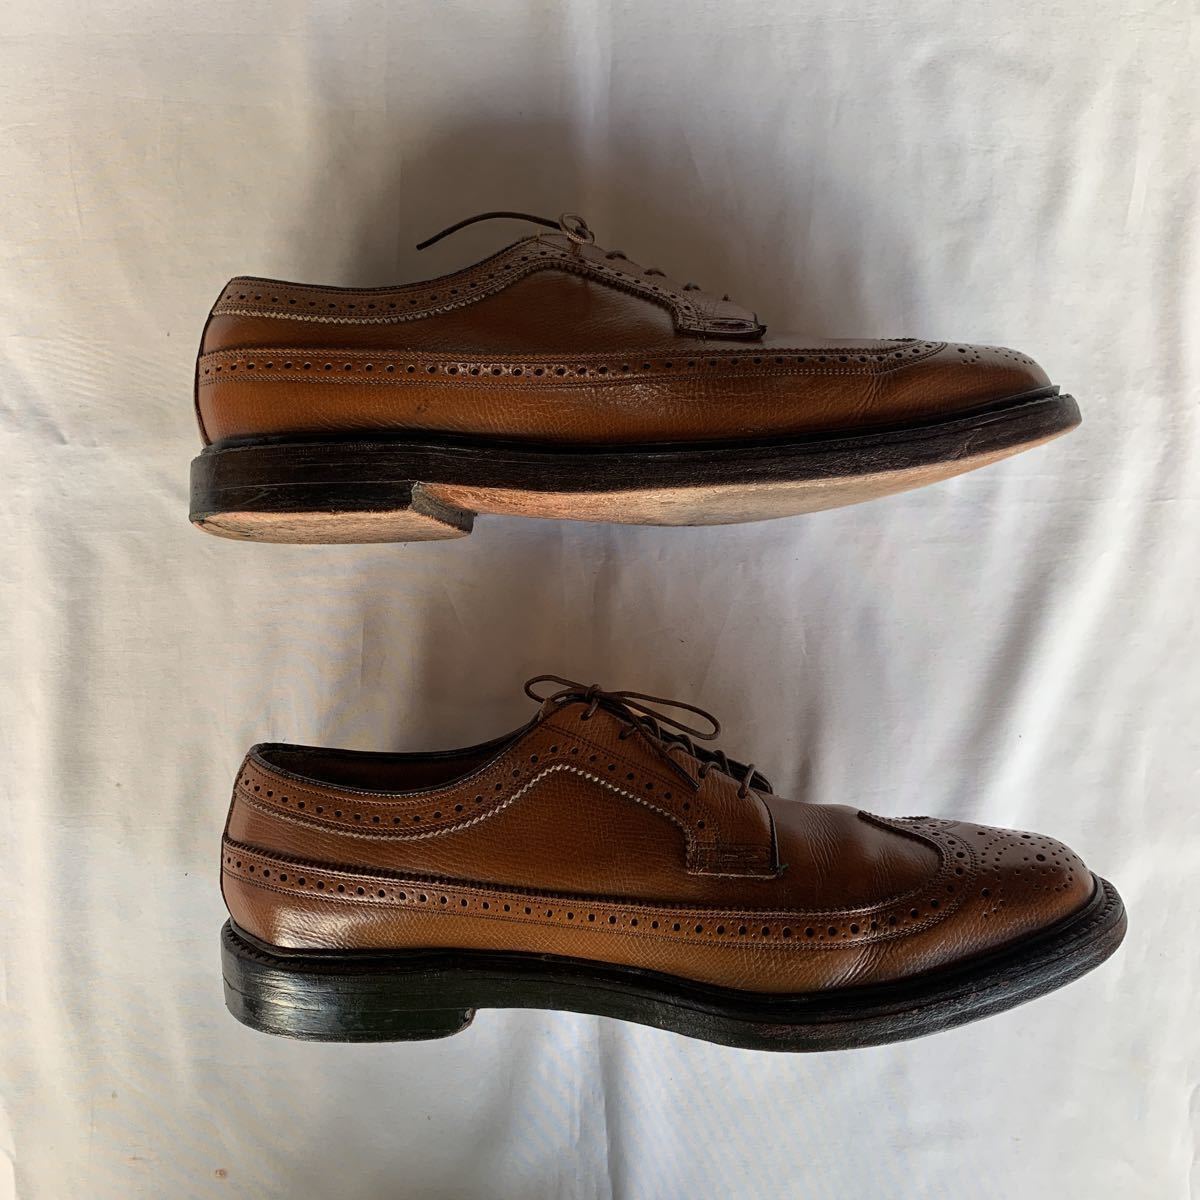 70s FLORSHEIM KENMOOR LEATHER SHOES FLORSHEIM IMPERIAL ヴィンテージ フローシャイム ケンムール 革靴 インペリアル 緑窓 60s 送料無料_画像4